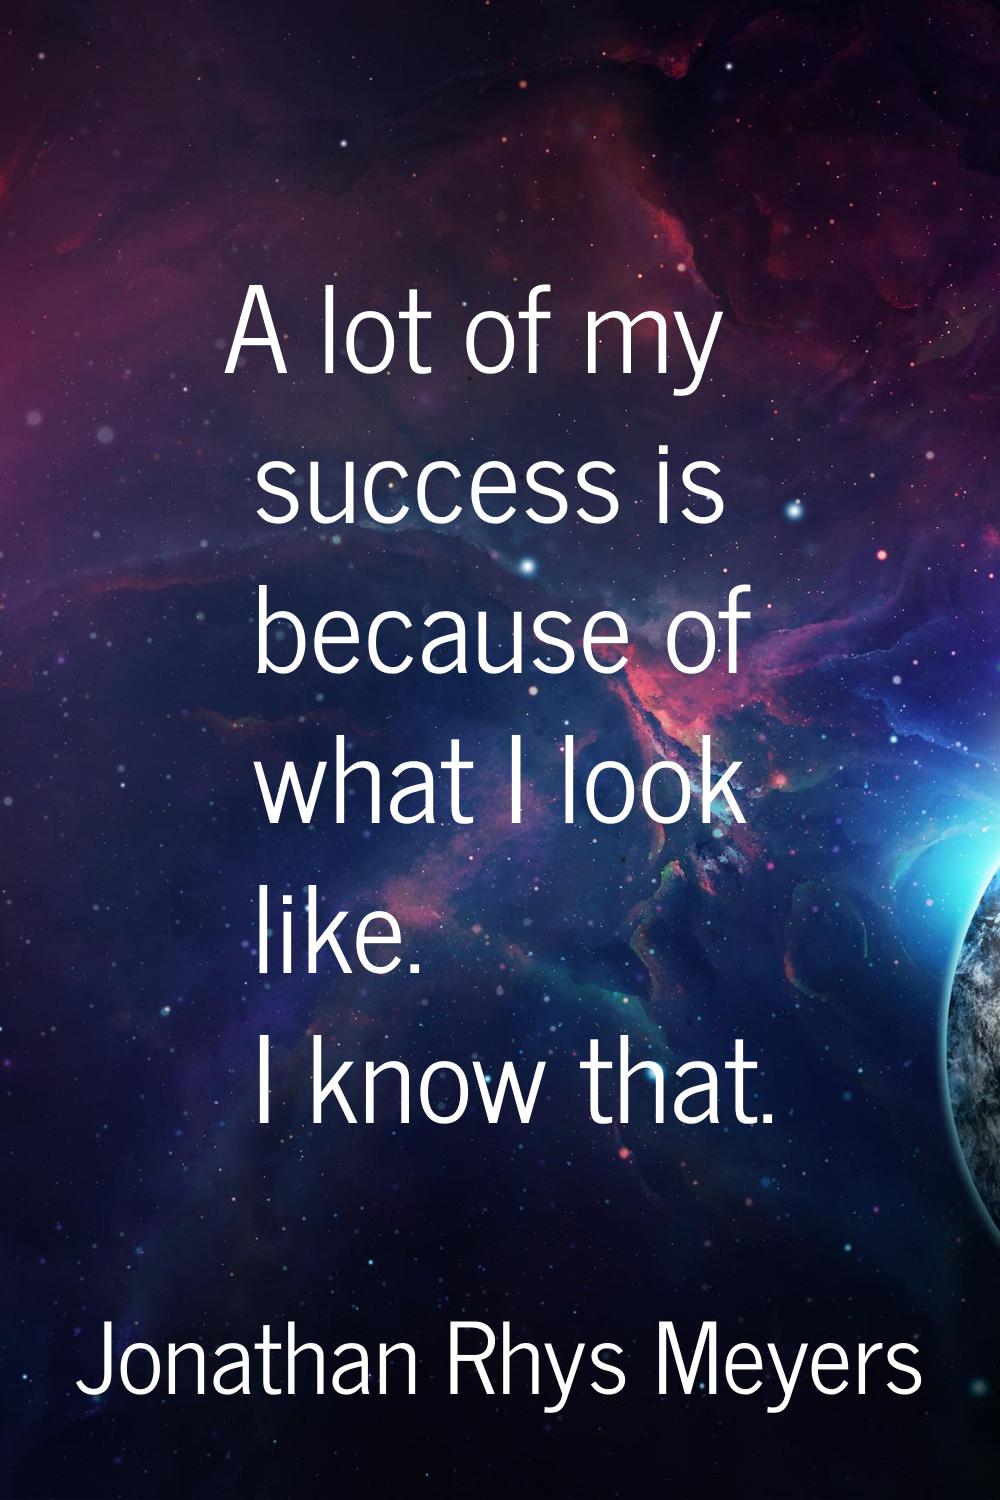 A lot of my success is because of what I look like. I know that.